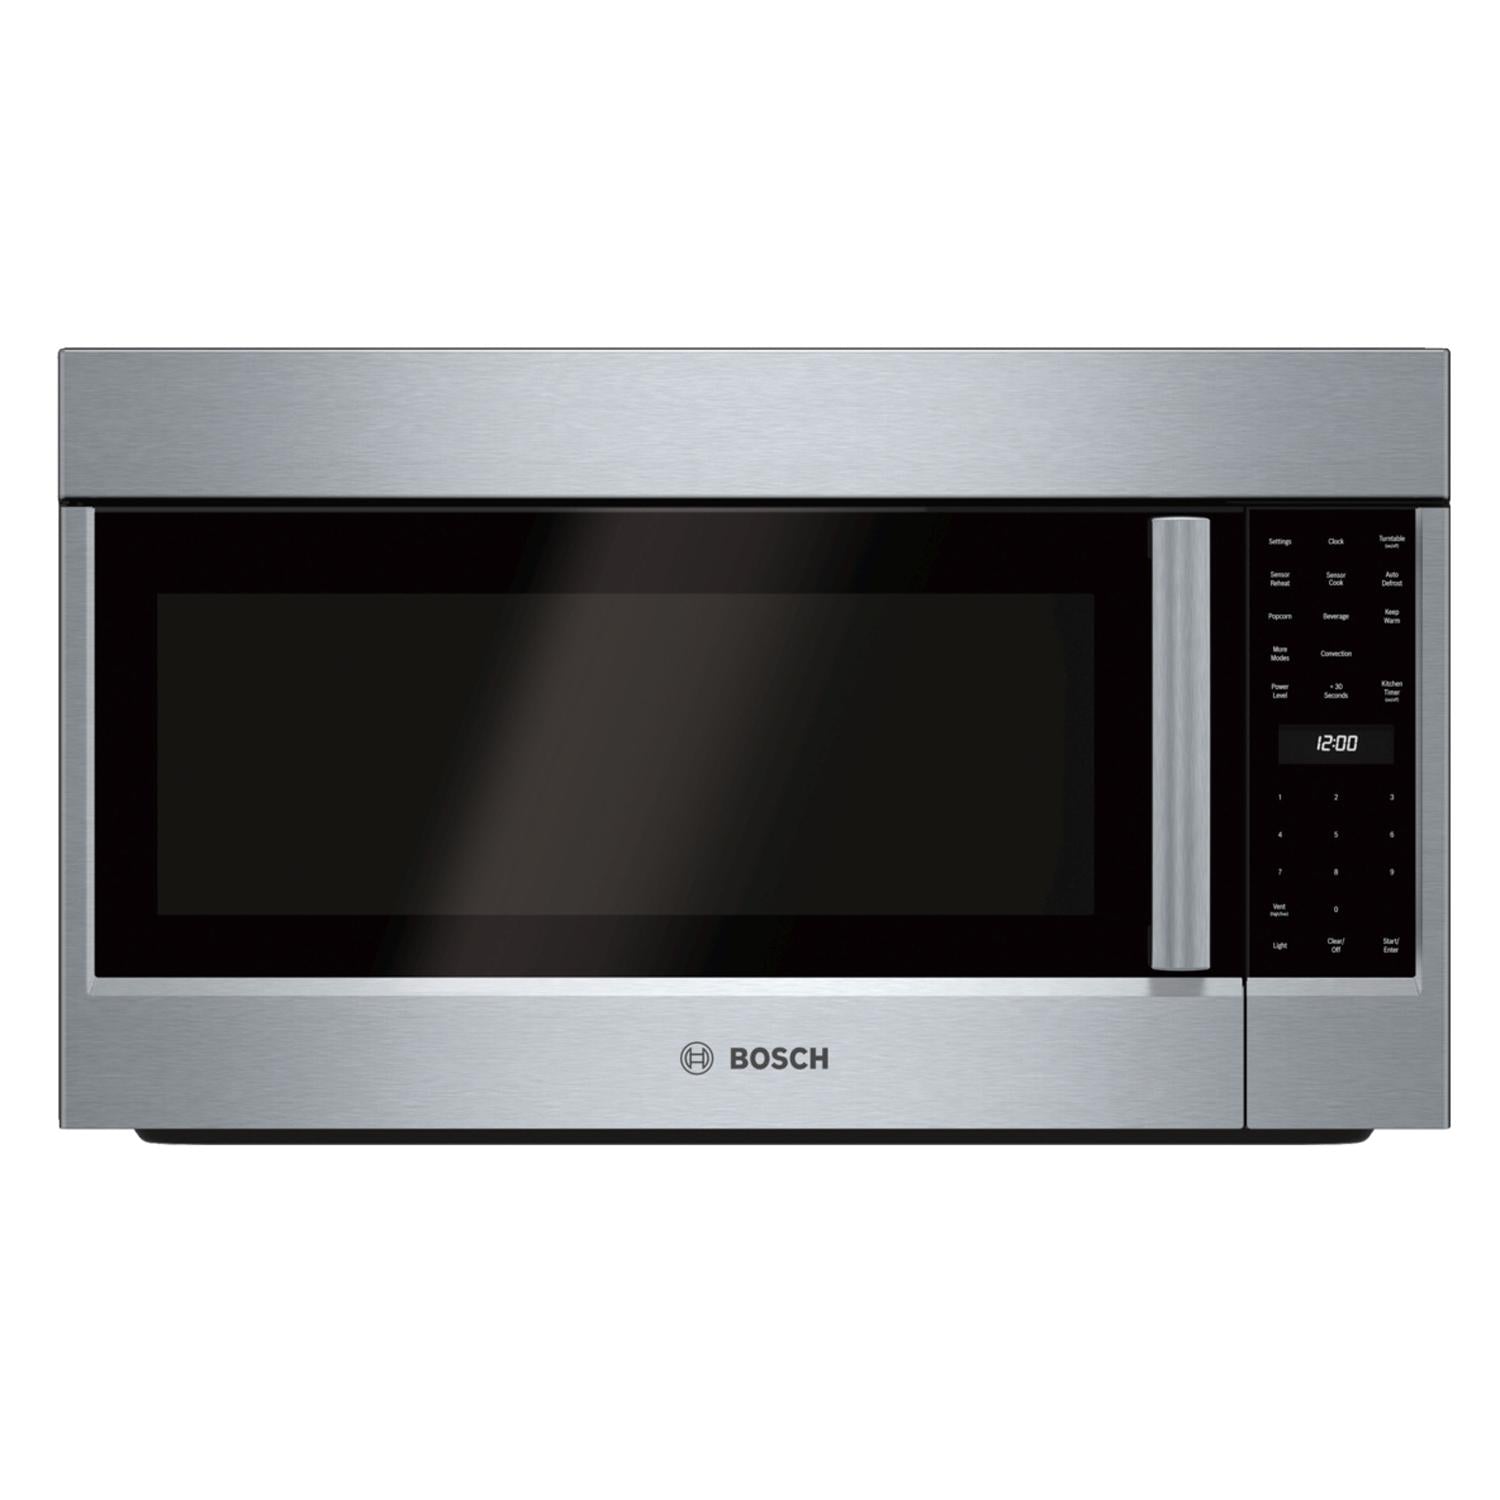 Bosch 30-inch, 1.8 cu. ft. Over-the-Range Microwave Oven with Convection HMVP053U